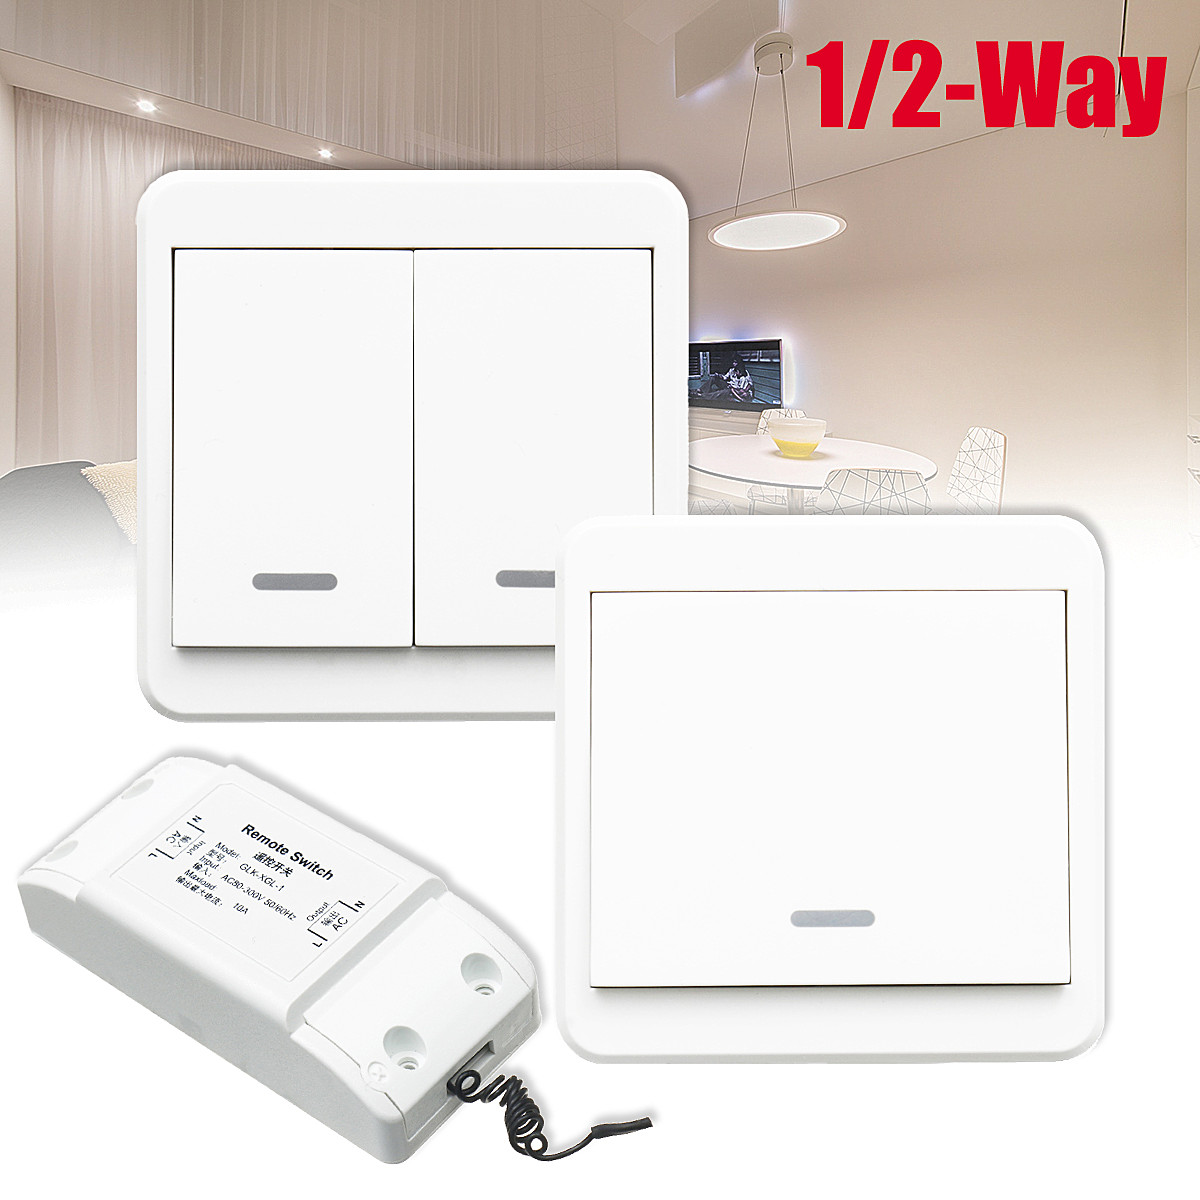 12Way-Lamp-Light-Wireless-Remote-Control-Switch-Receiver-Transmitter-ONOFF-Switch-Controller-1304488-1